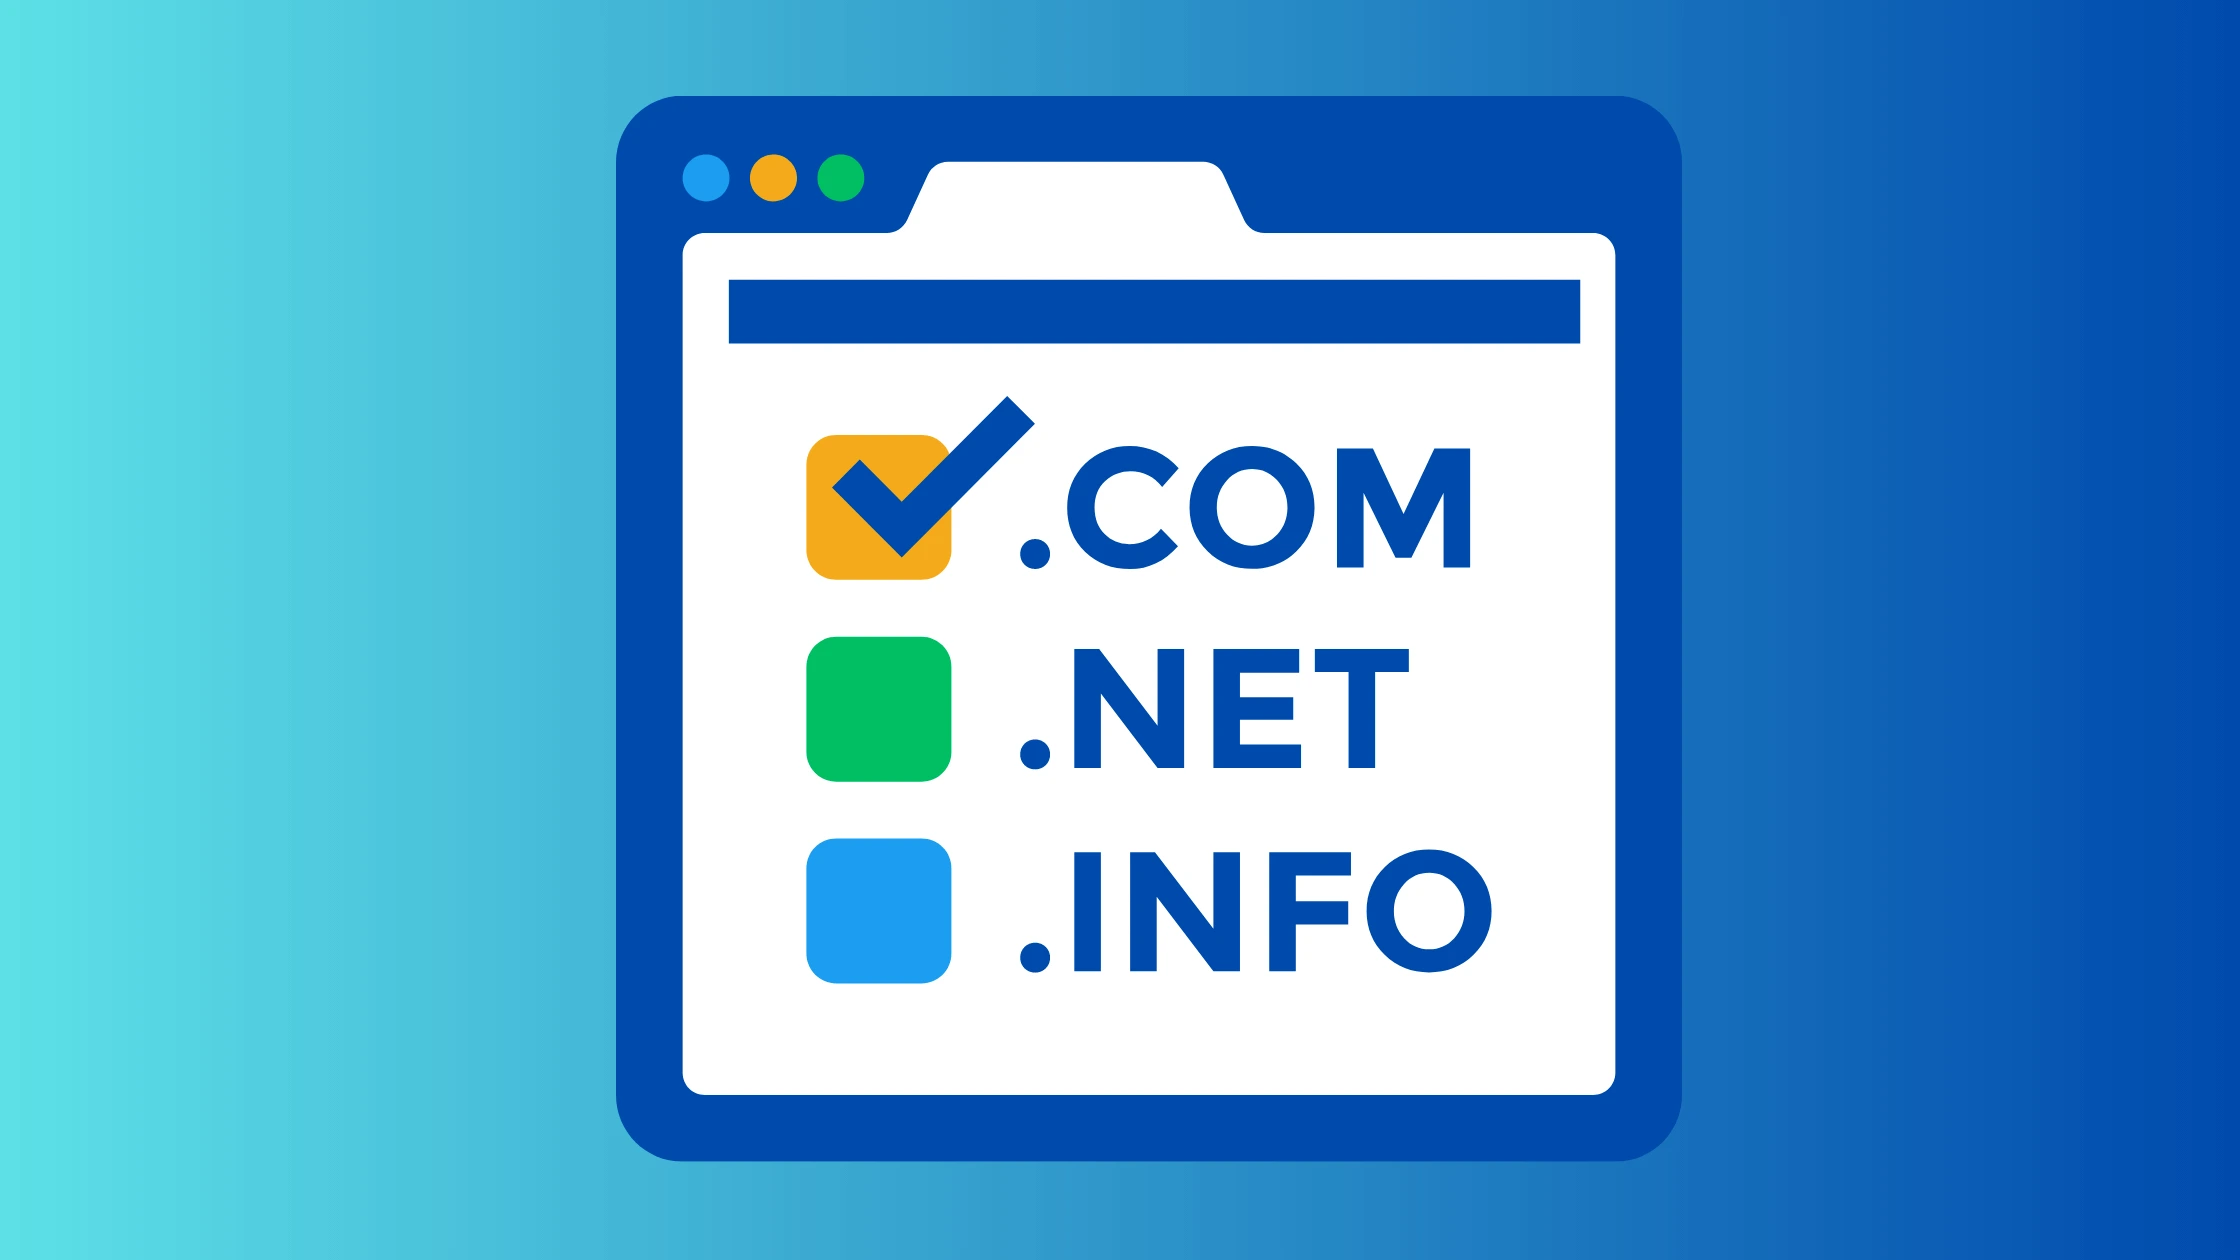 Choose the Right Domain Name from .com .net .info